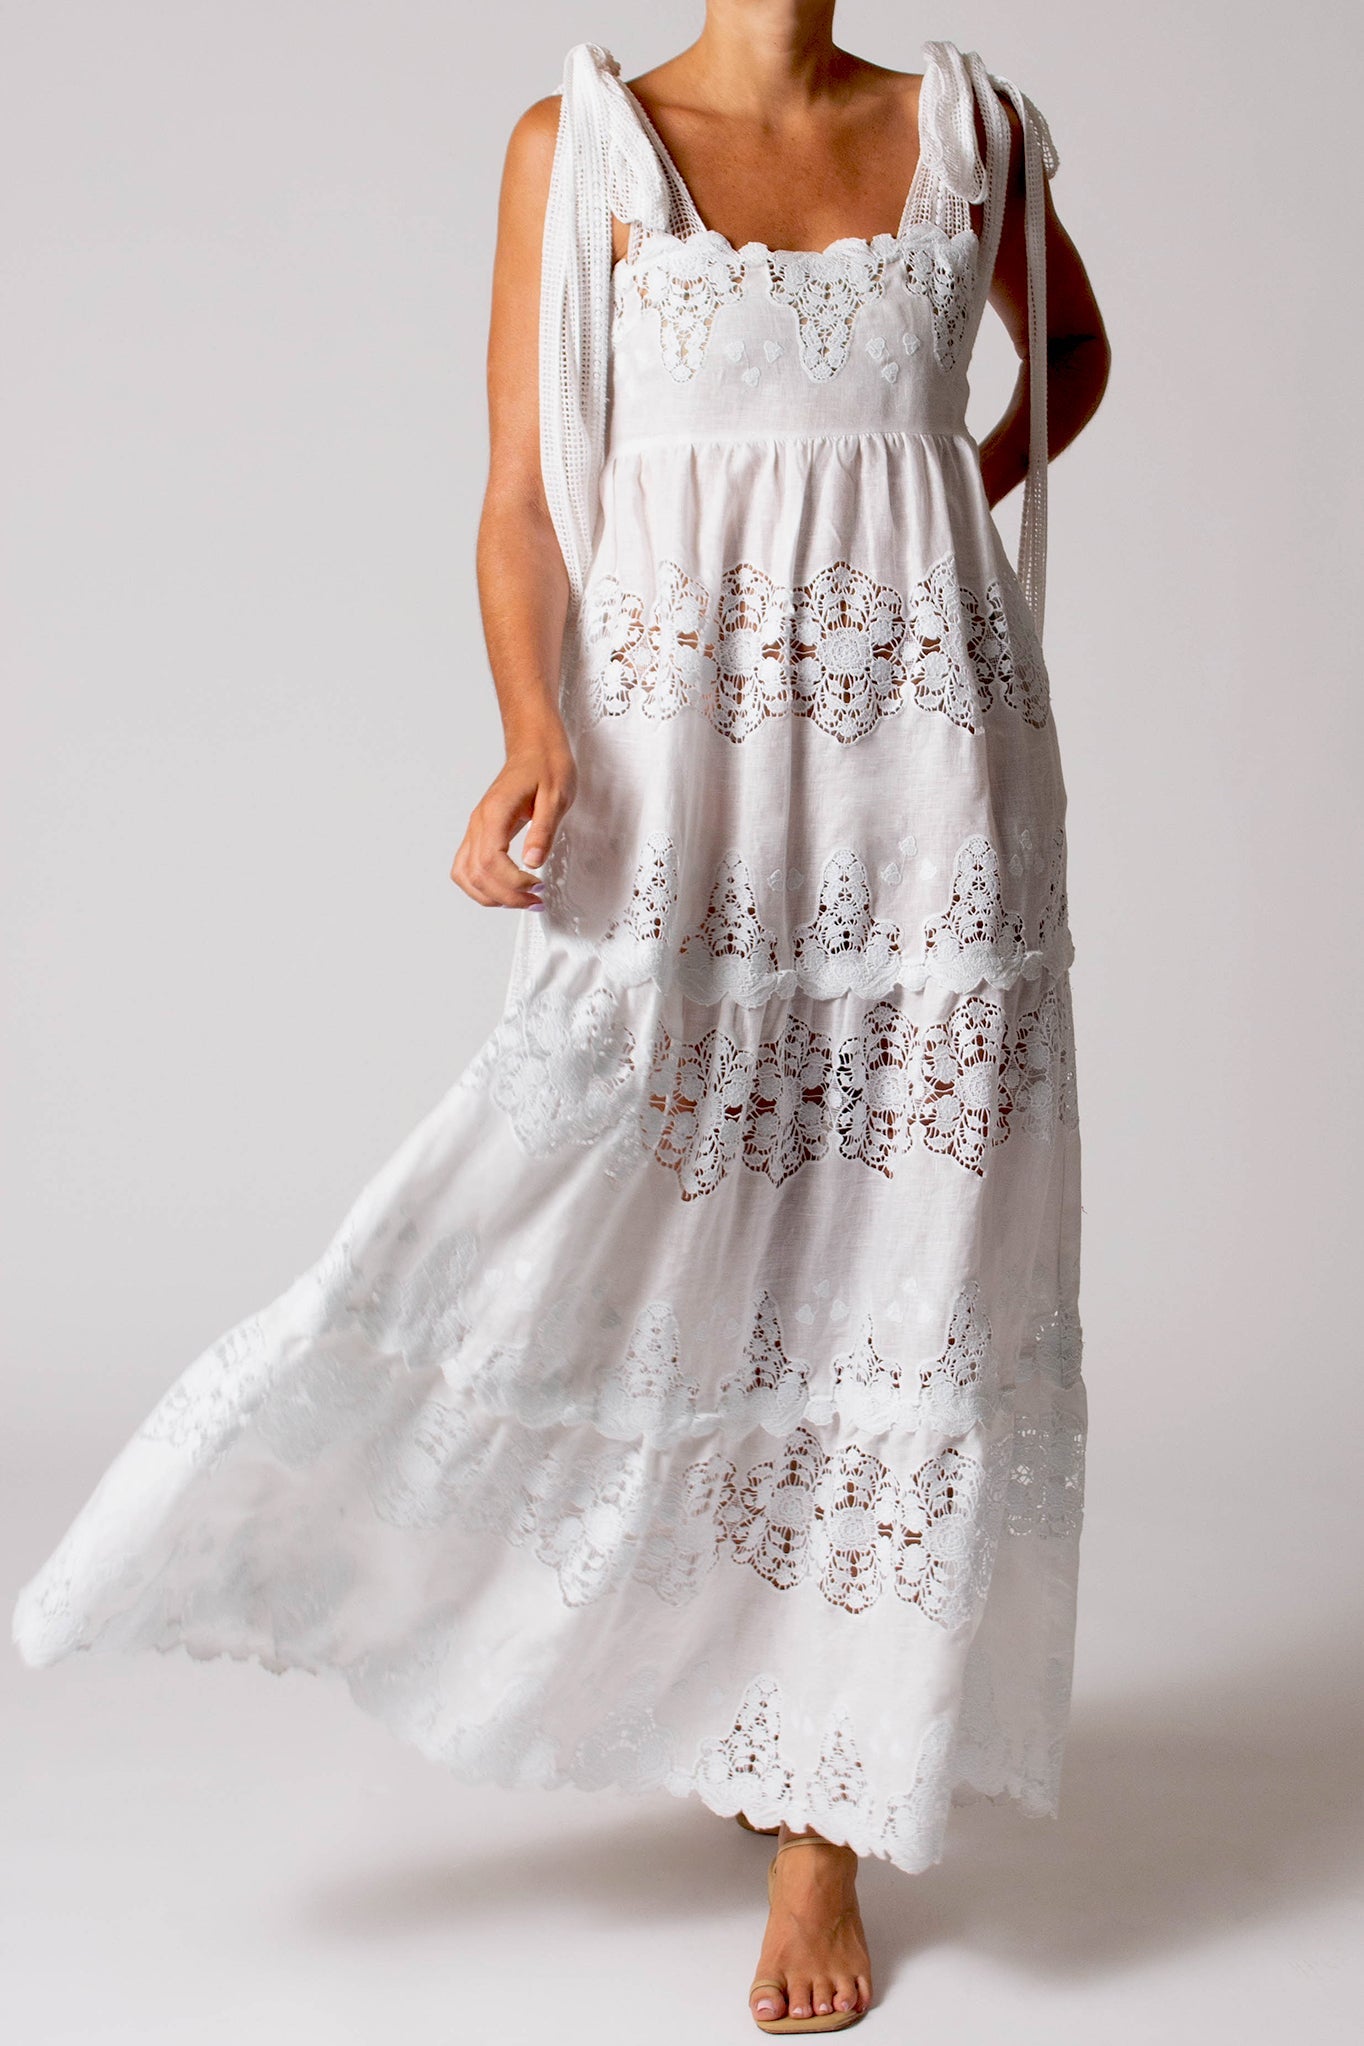 Juniper Cloisters Linen Embroidery Dress by Miguelina